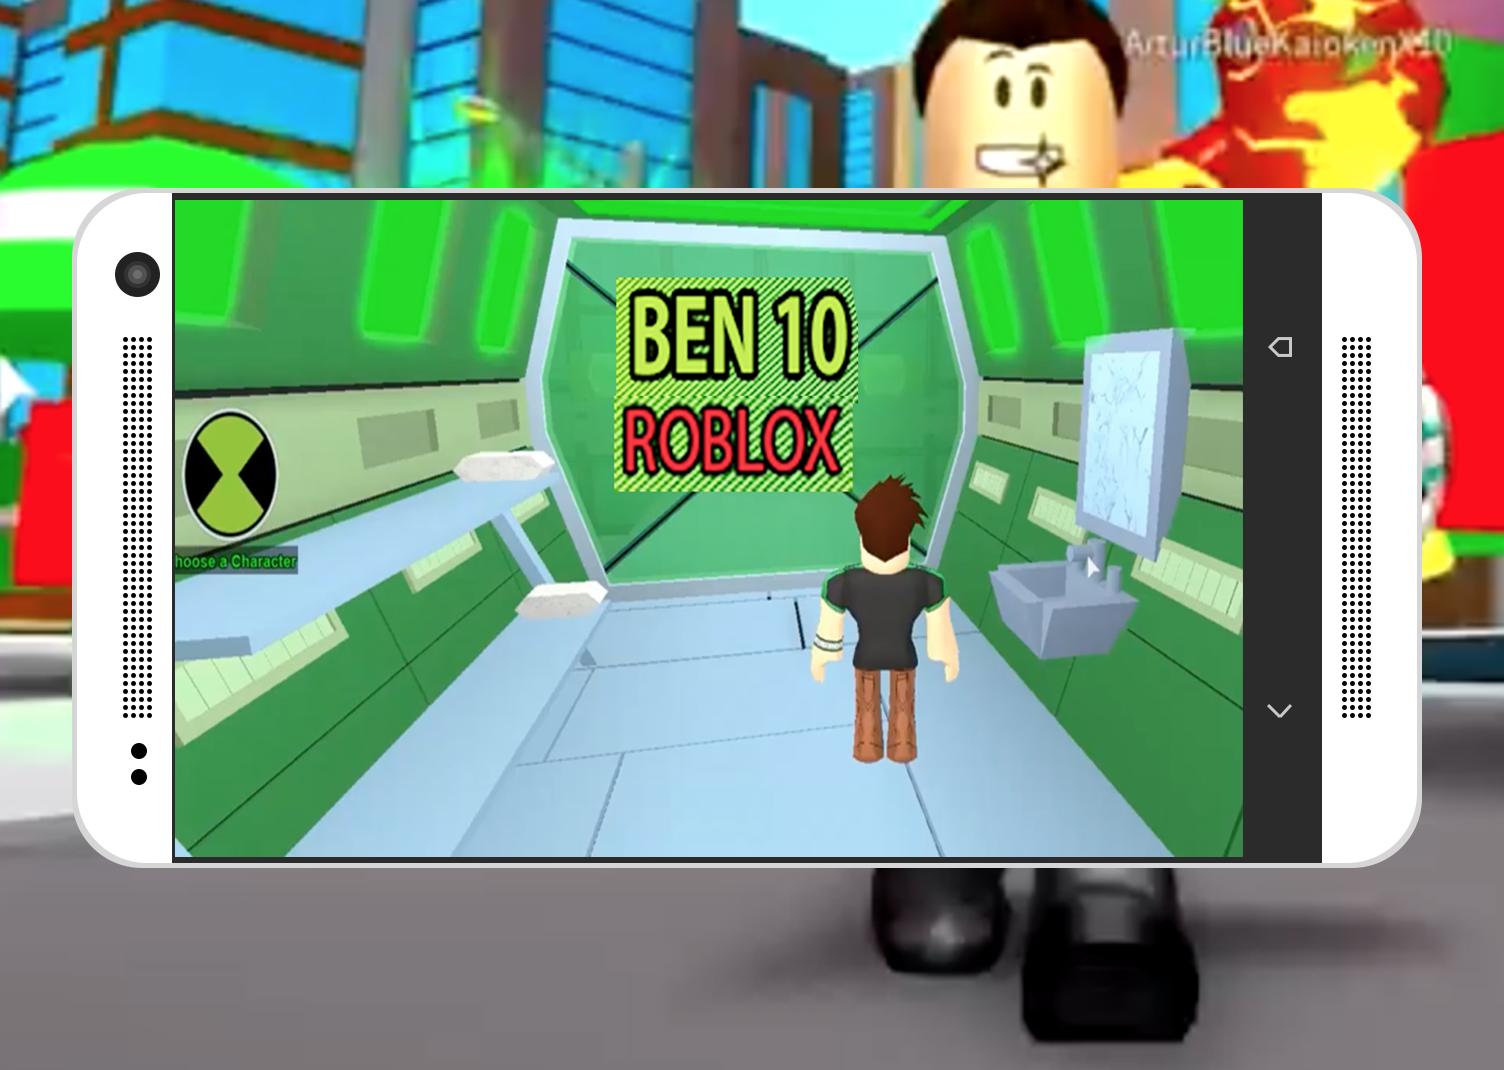 Guide For Ben 10 Evil Ben 10 Roblox For Android Apk Download - guide for ben 10 ultimate evil ben 10 roblox new for android